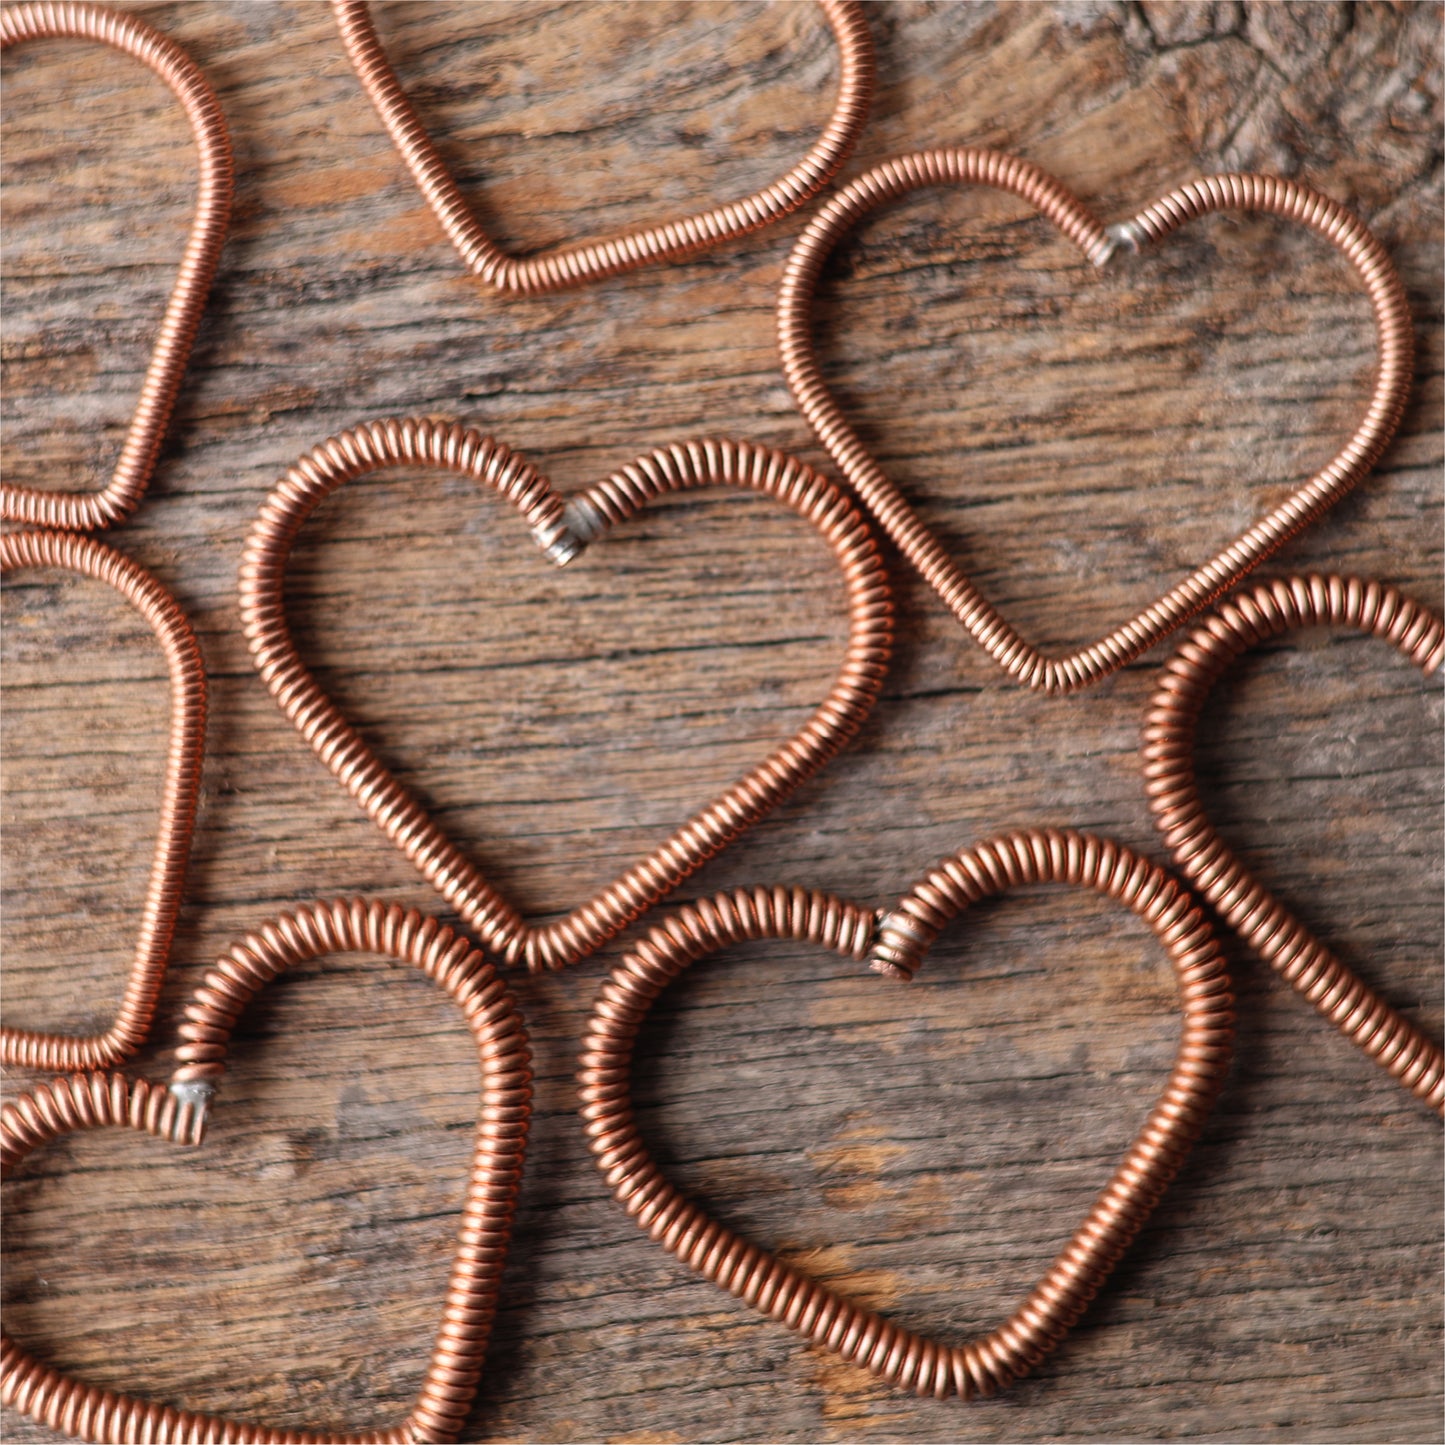 Reclaimed Piano Wire Hearts